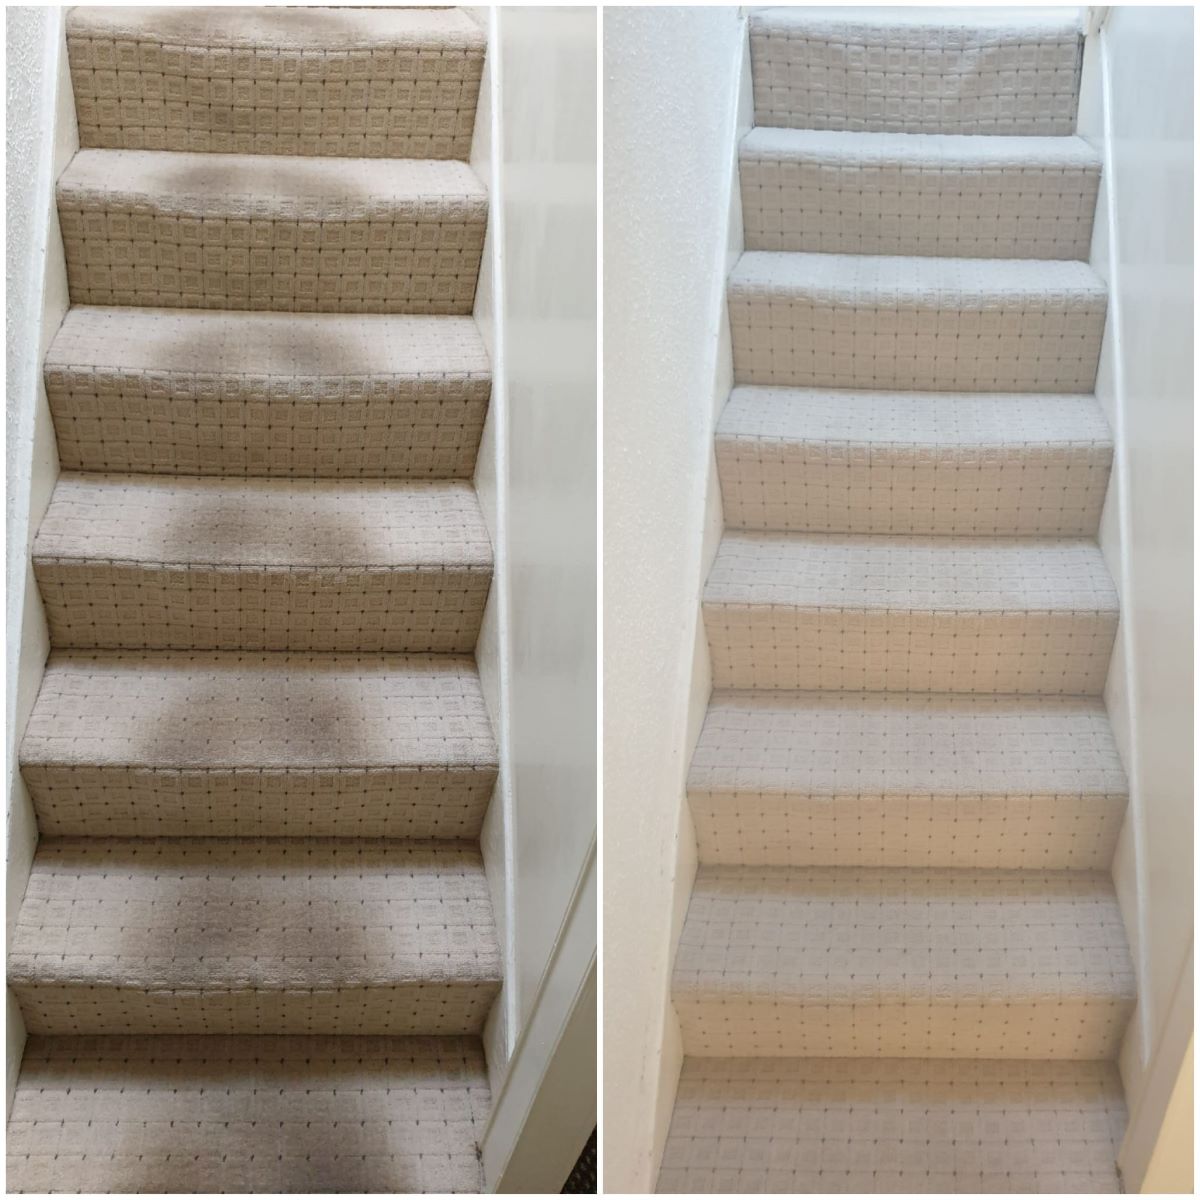 Stair carpet cleaning - before and after